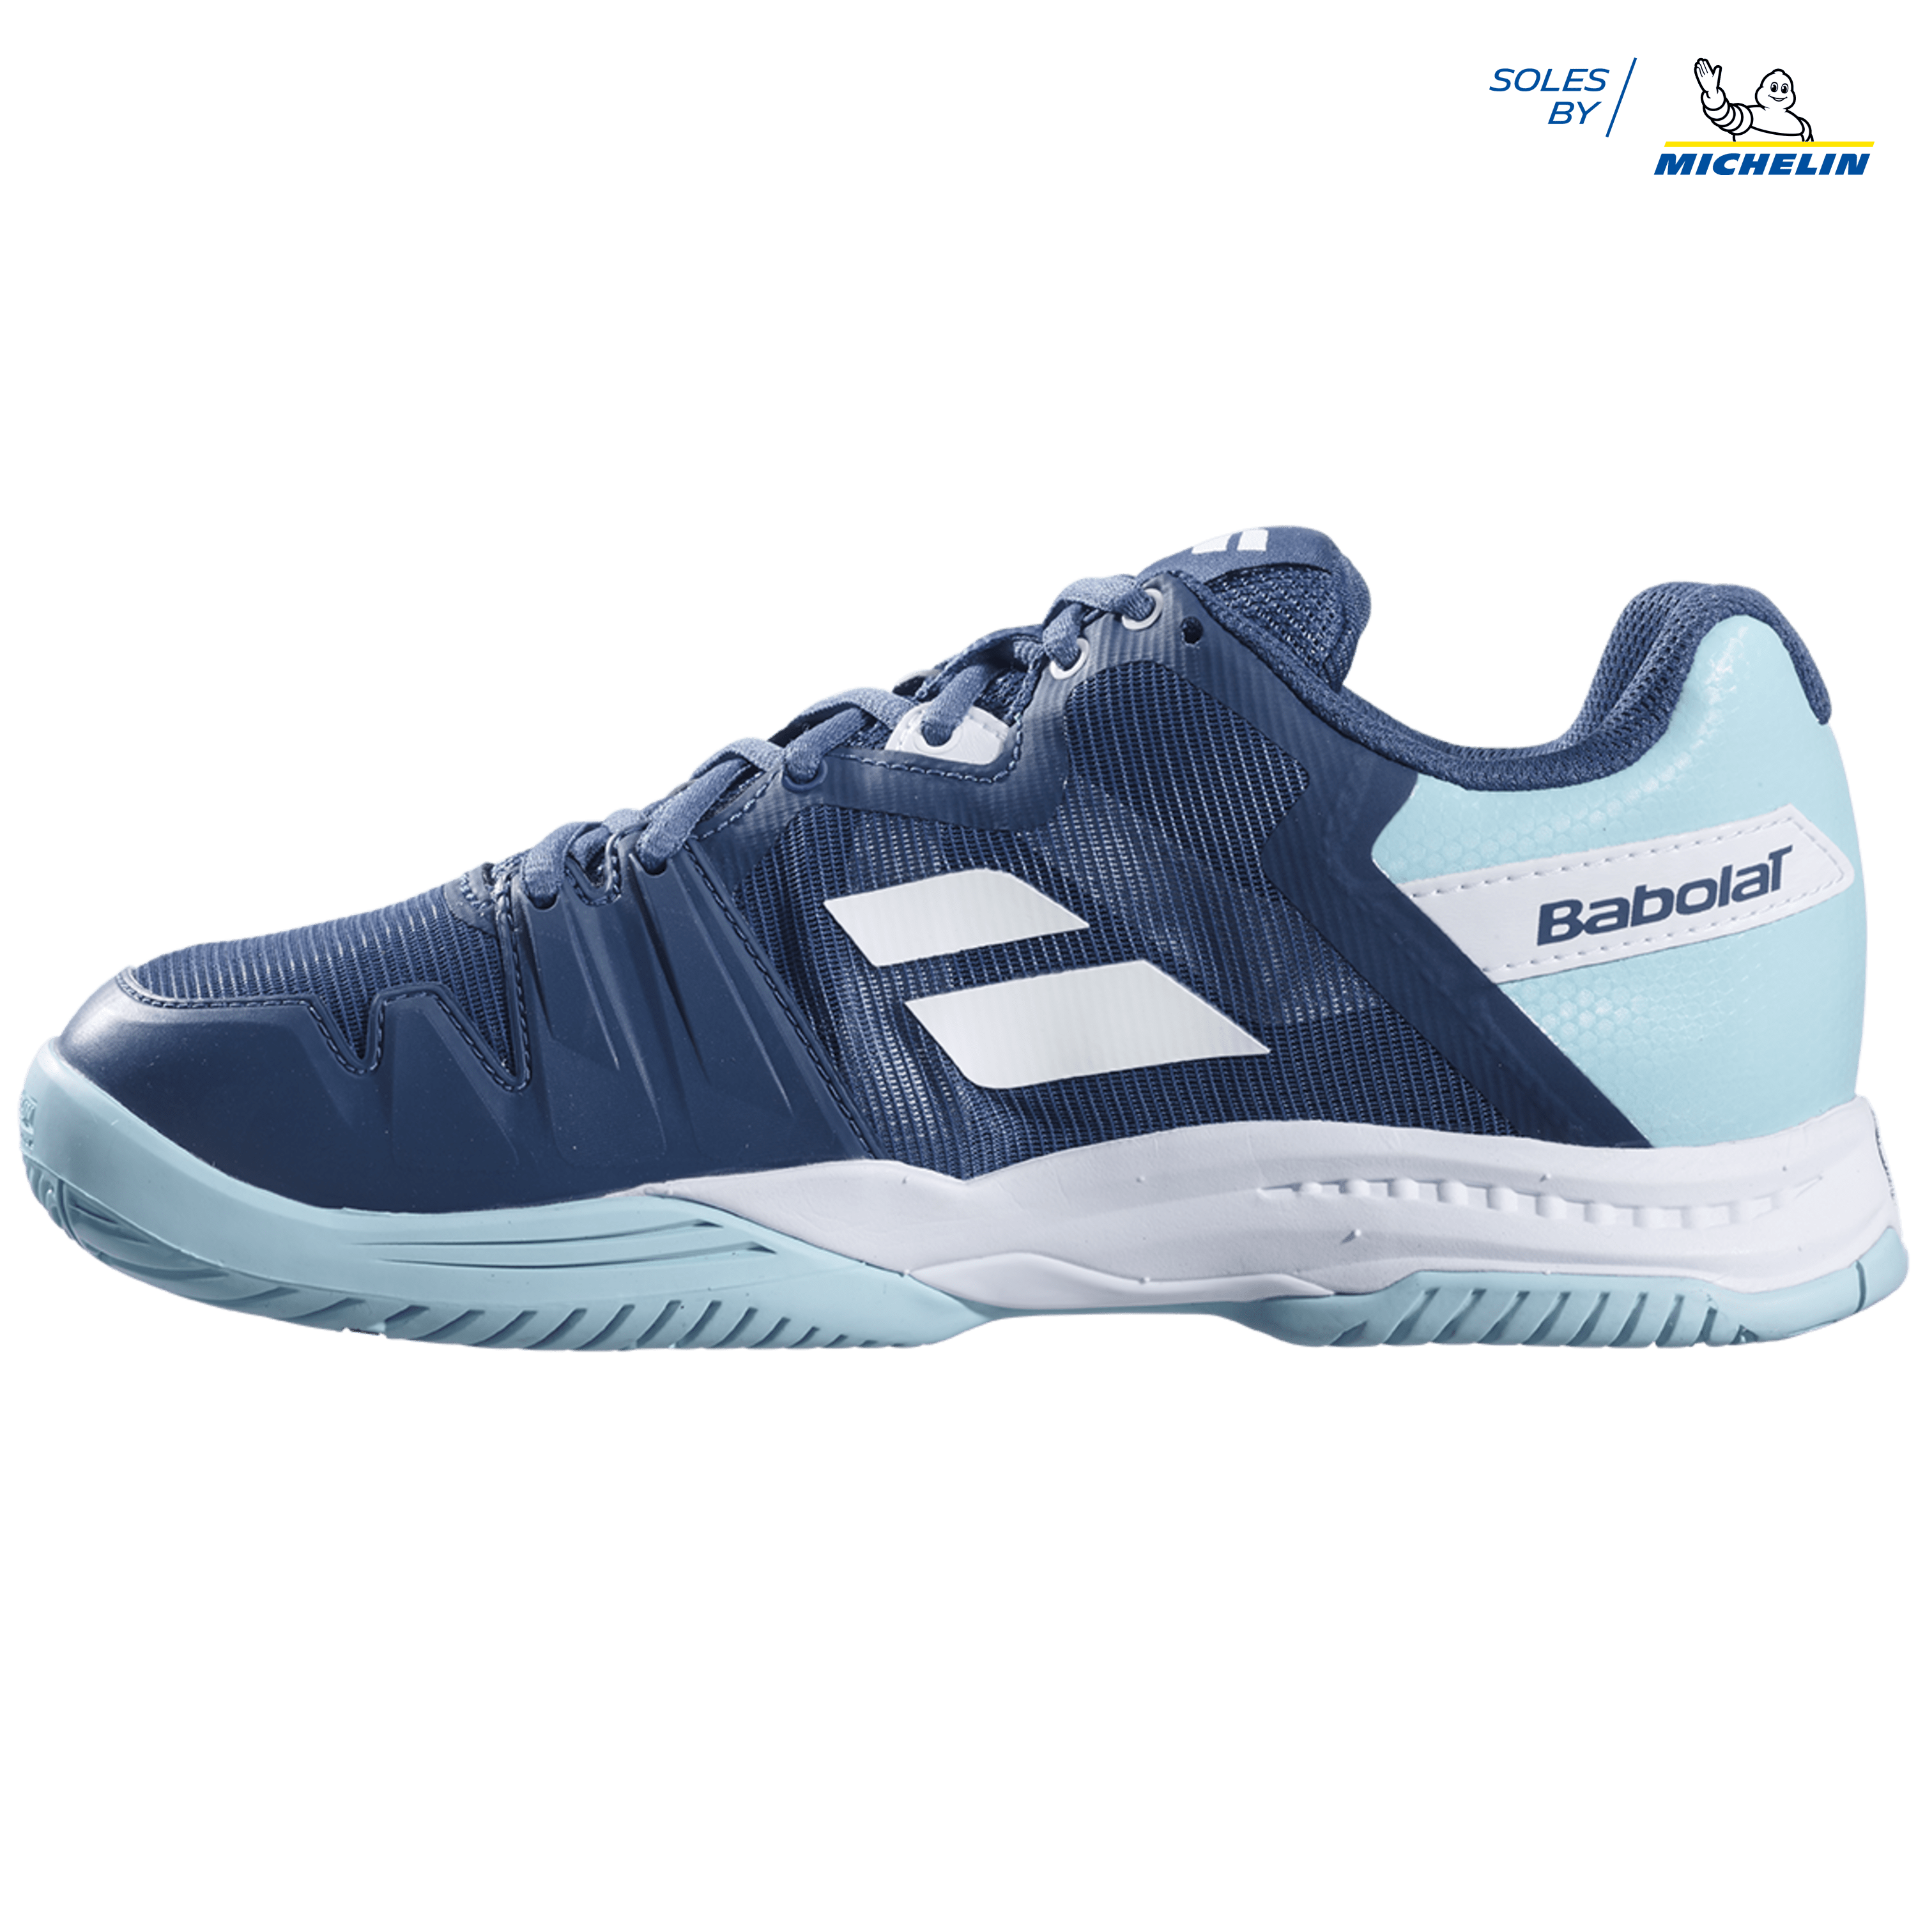 Babolat Shoes Michelin | lupon.gov.ph